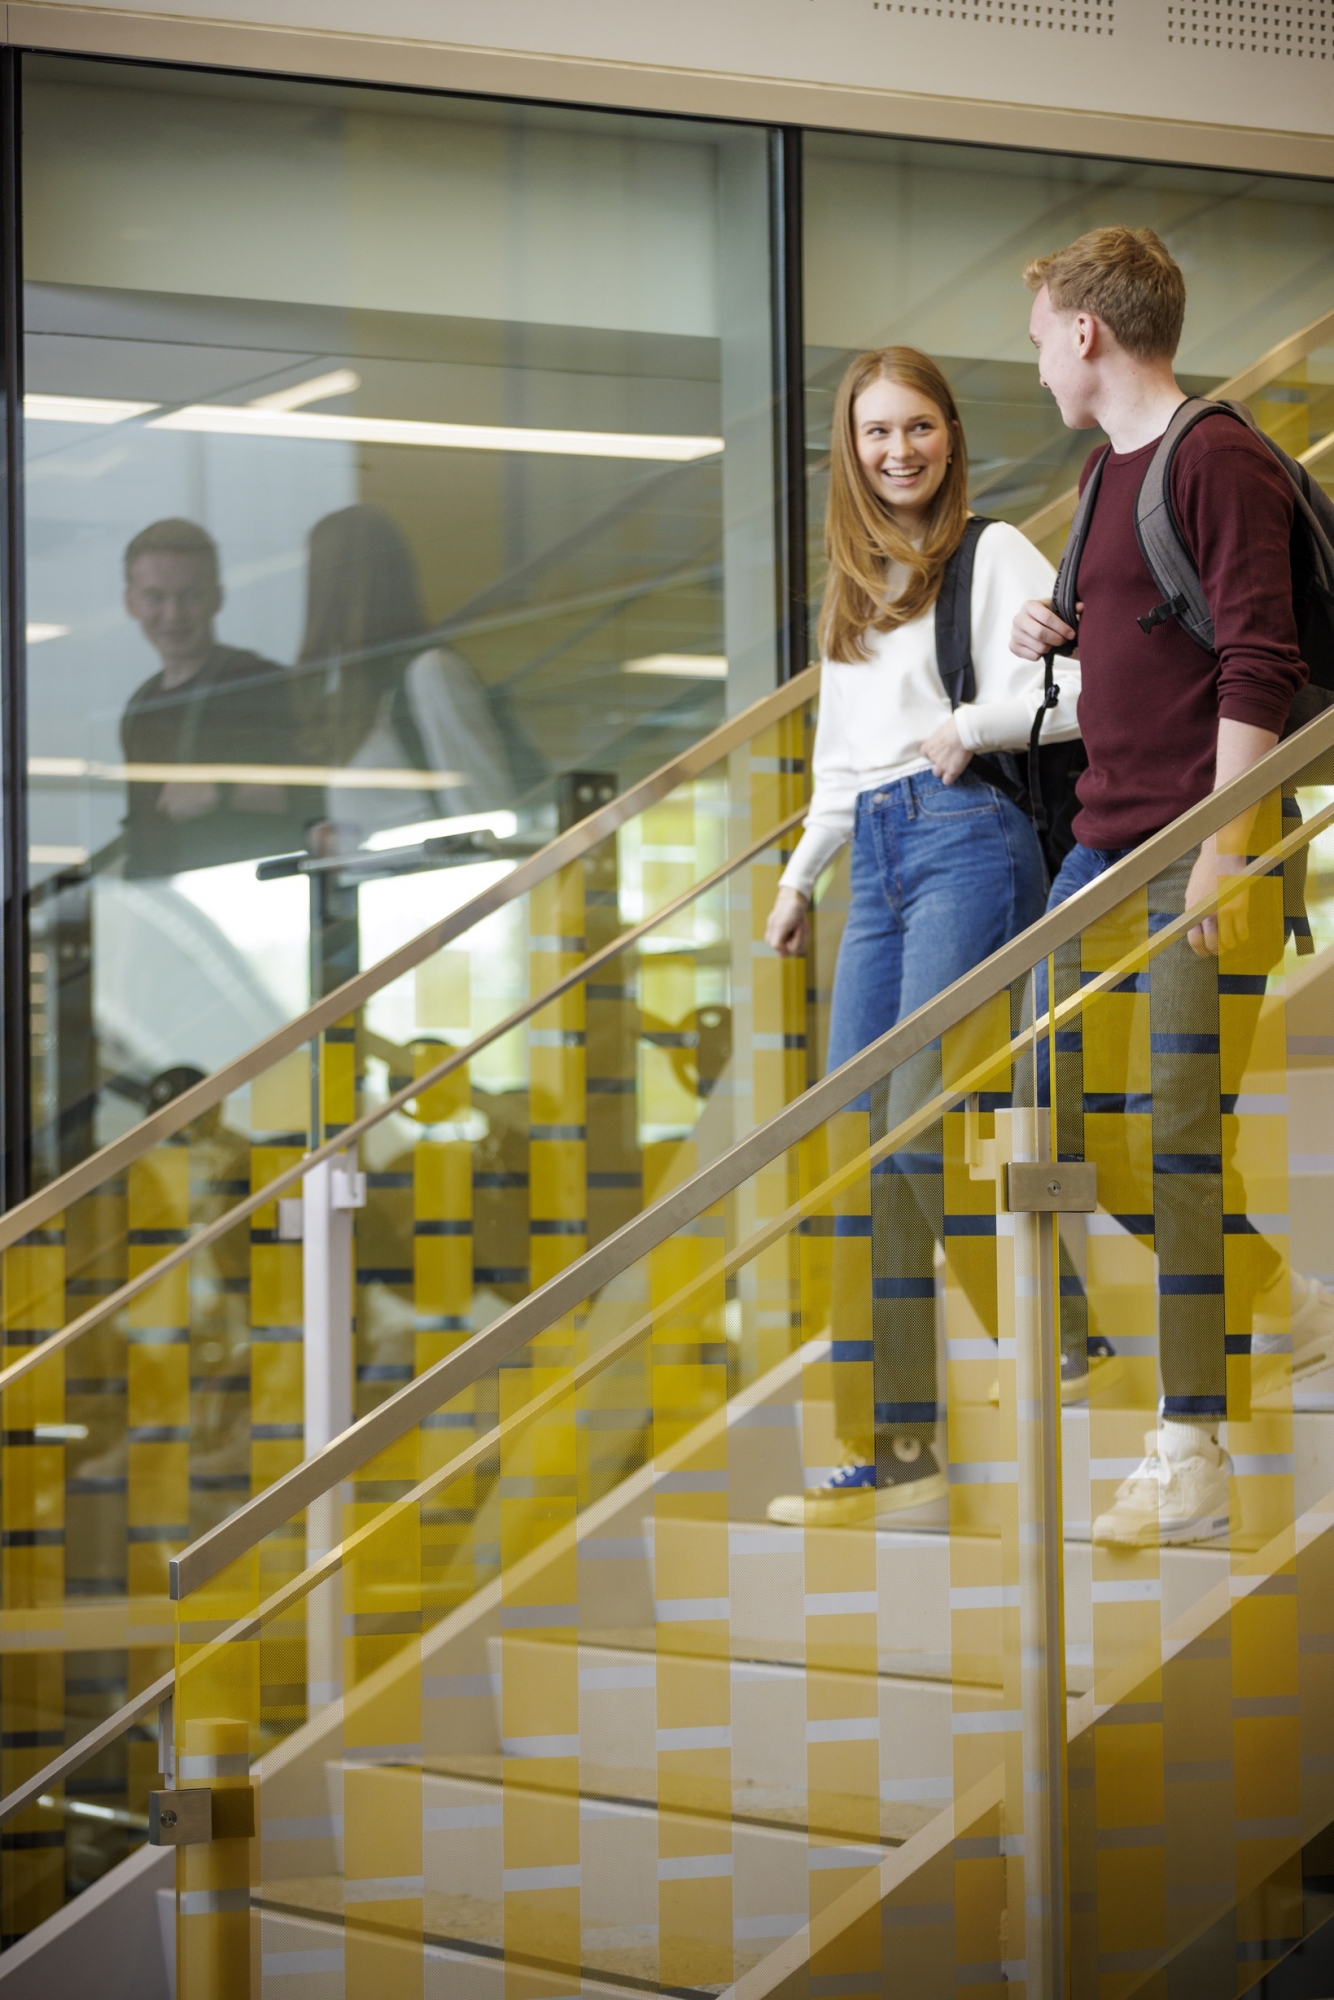 A male and female student walk down a staircase